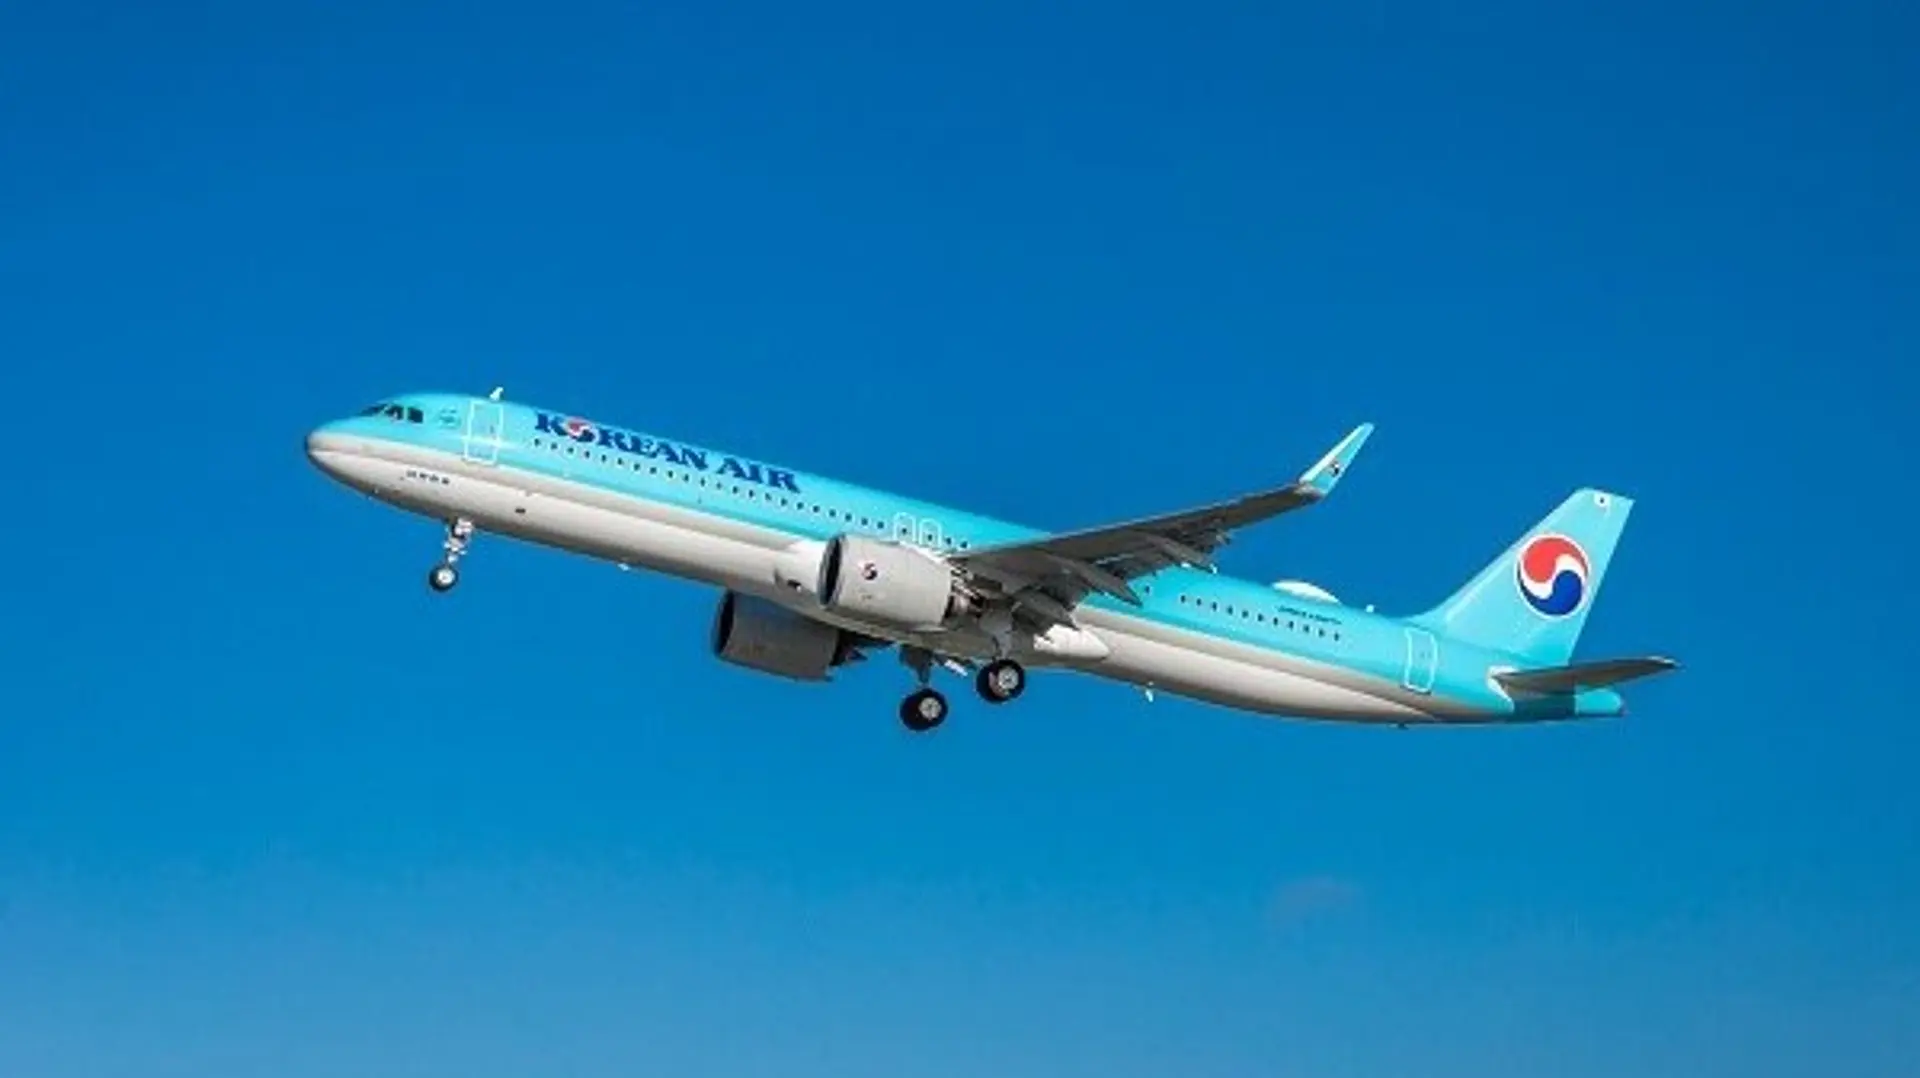 Airlines News - Korean Air unveils new Business Class cabin on its Airbus A321neo fleet